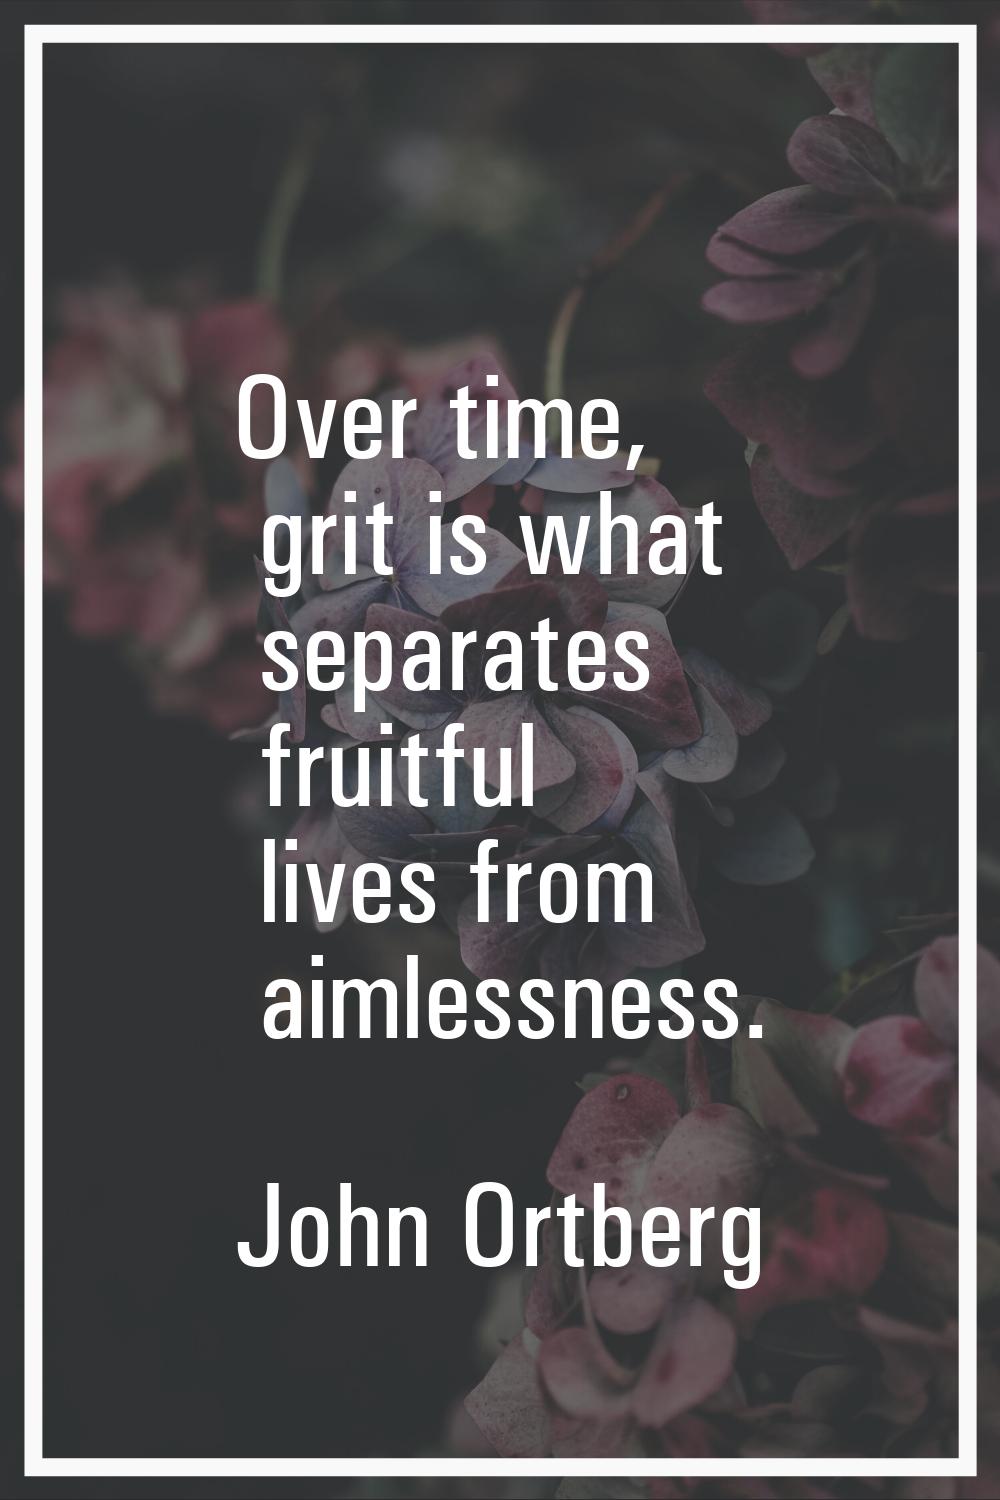 Over time, grit is what separates fruitful lives from aimlessness.